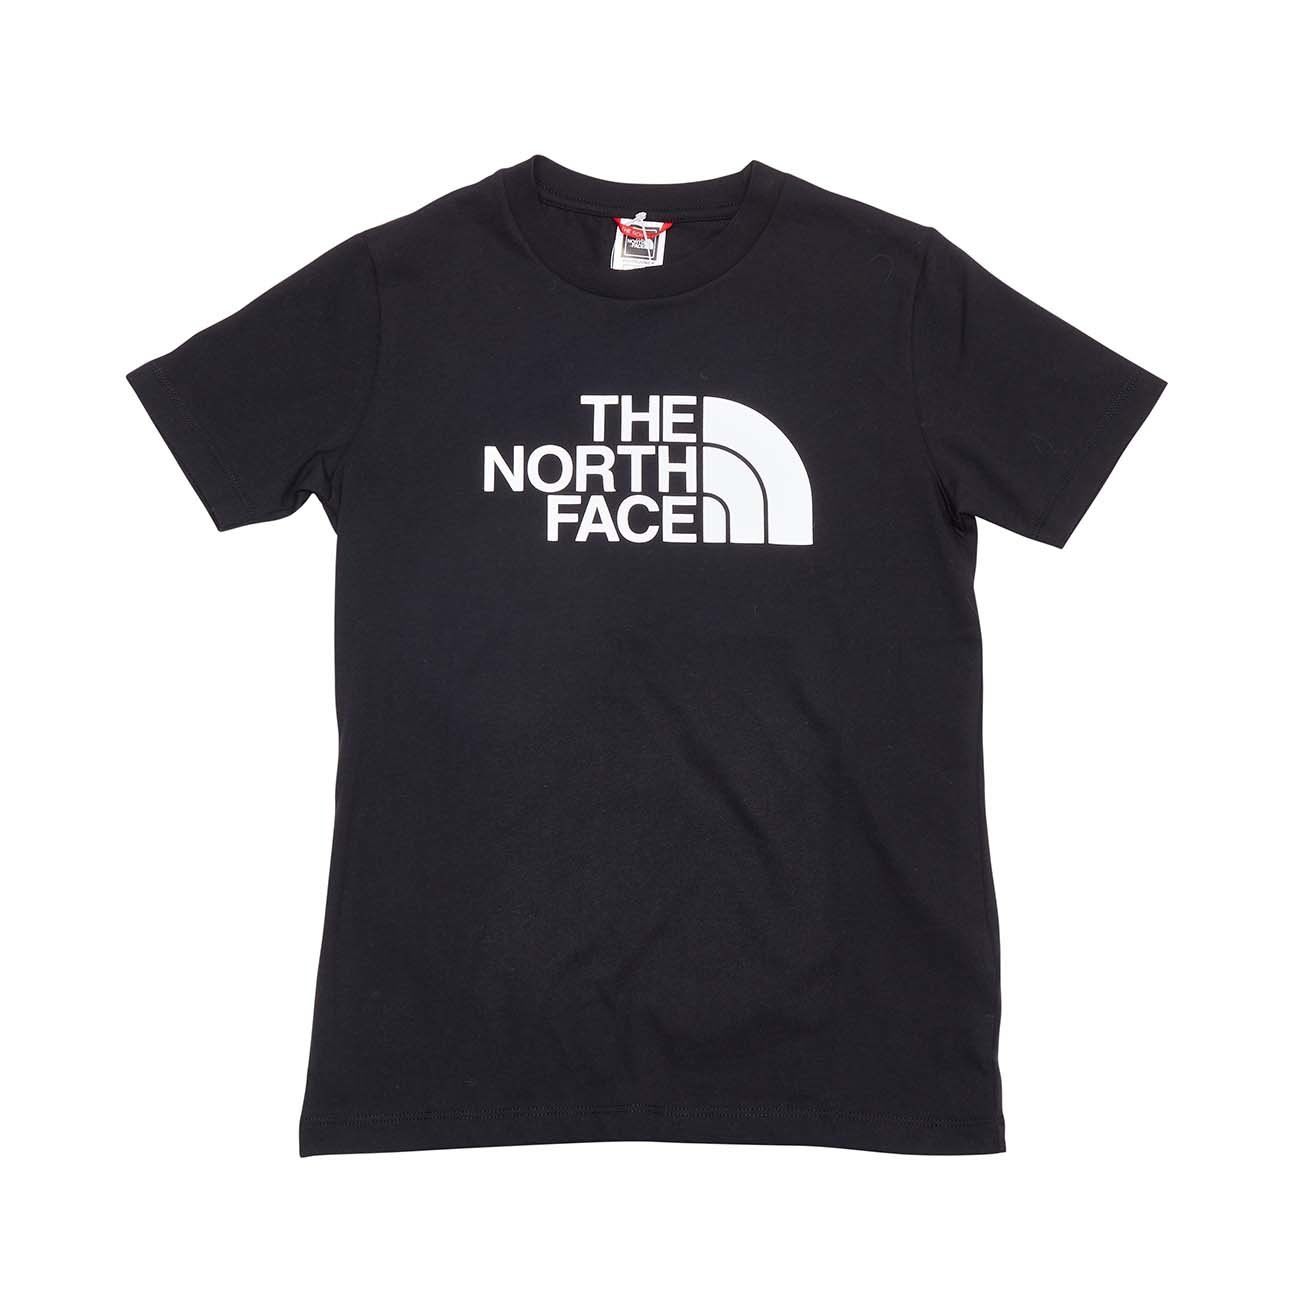 THE NORTH EASY | Mascheroni T-SHIRT FACE Black White Kid WITH Store LOGO